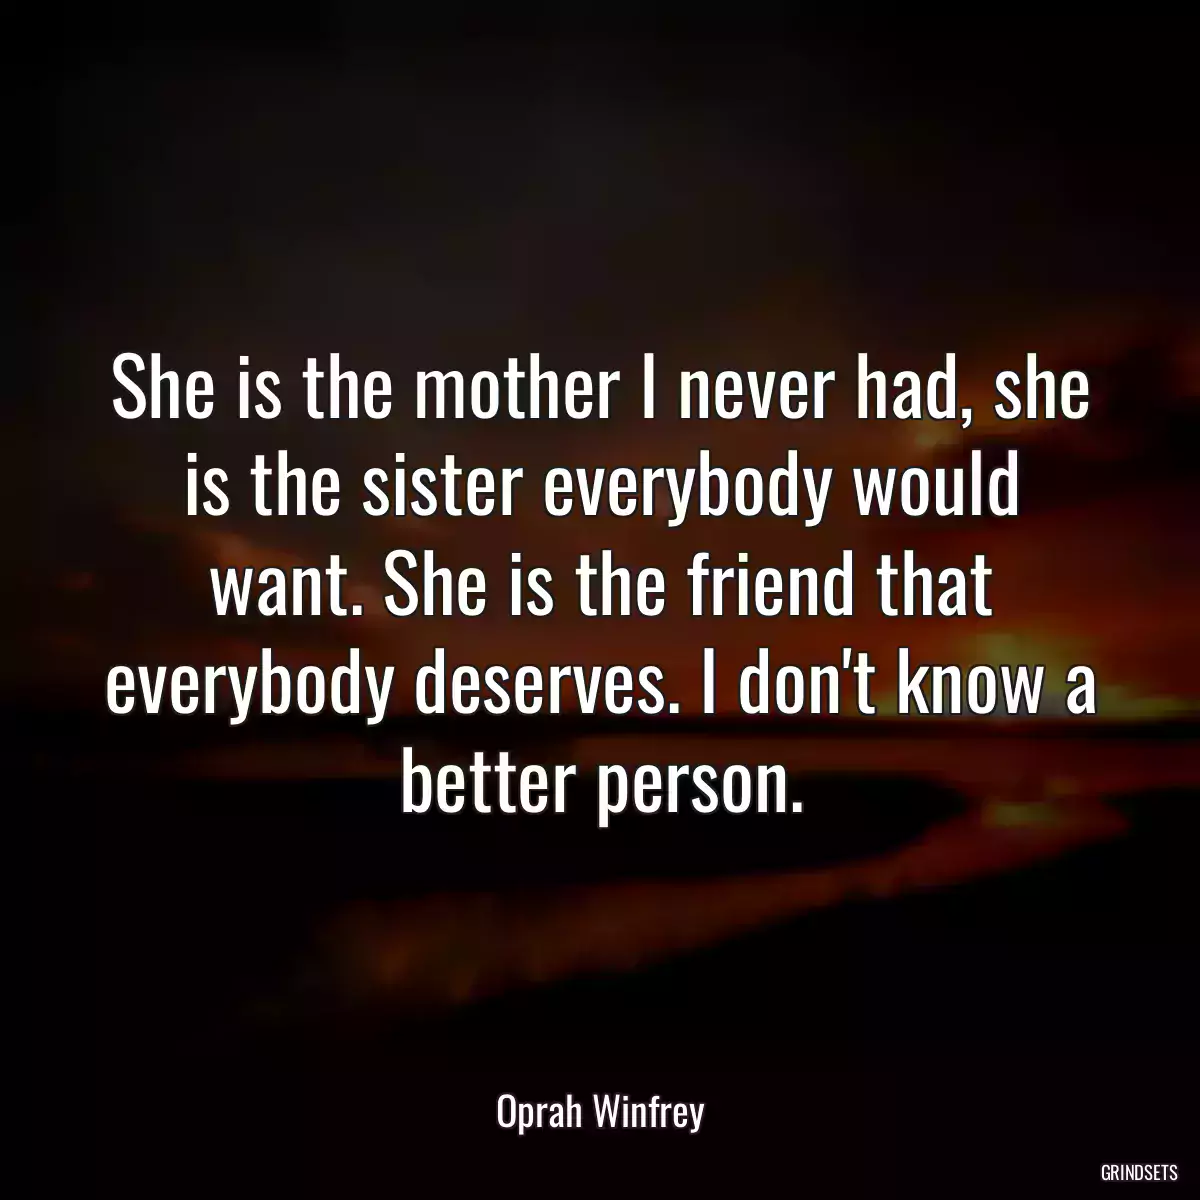 She is the mother I never had, she is the sister everybody would want. She is the friend that everybody deserves. I don\'t know a better person.